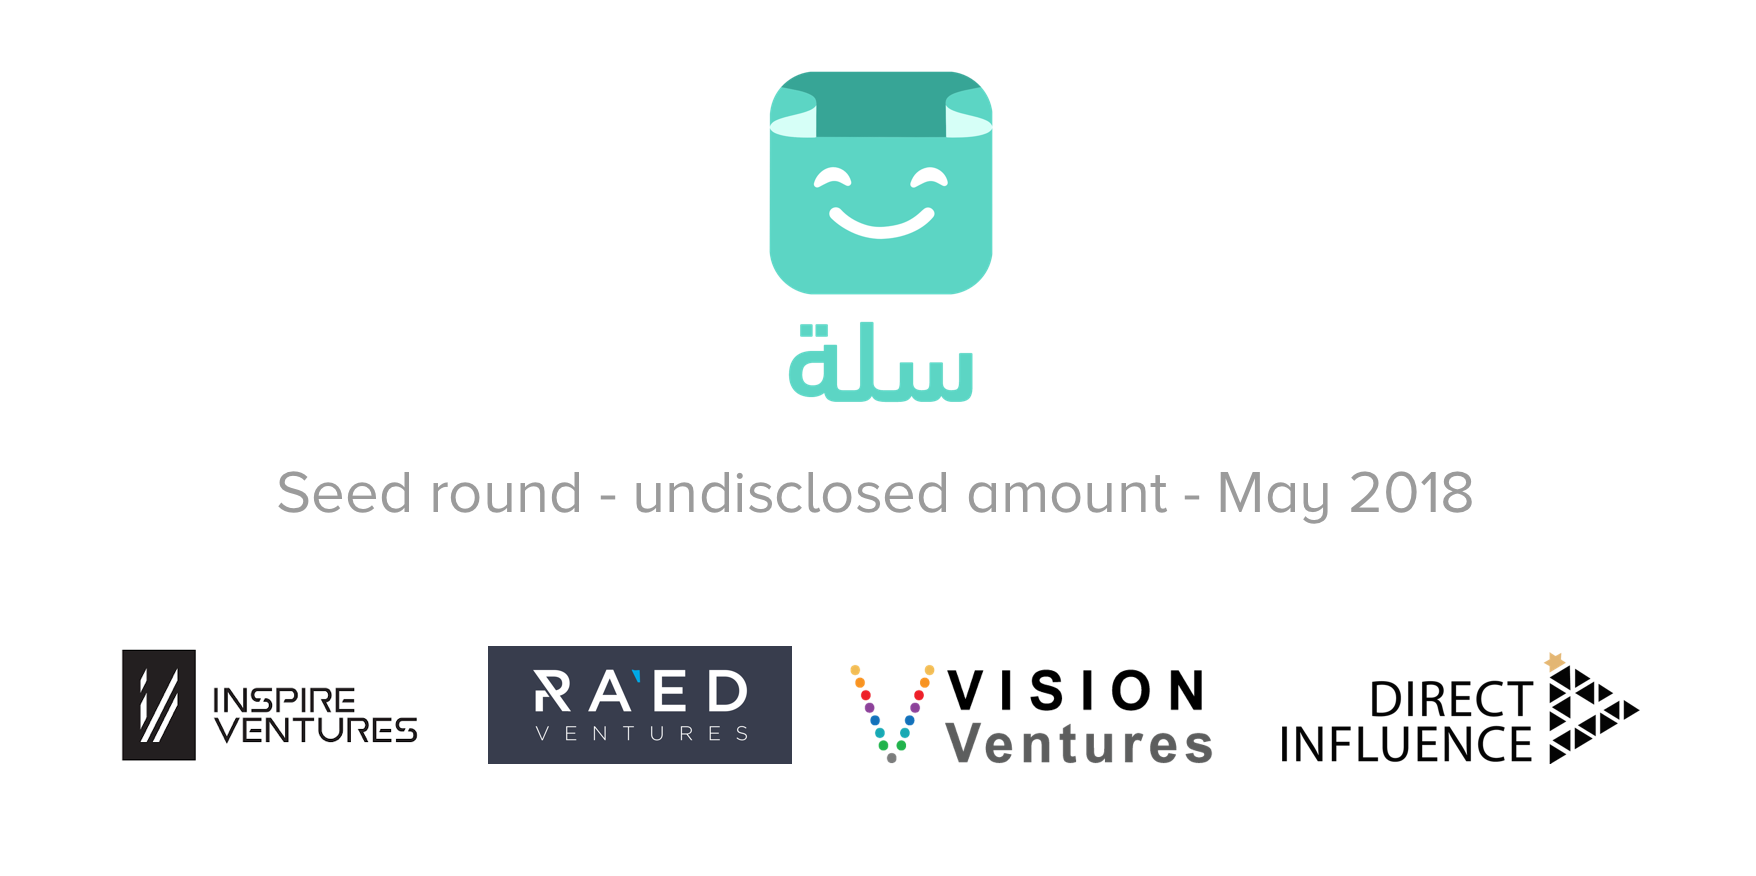 Raed Ventures led the seed round of Salla platform